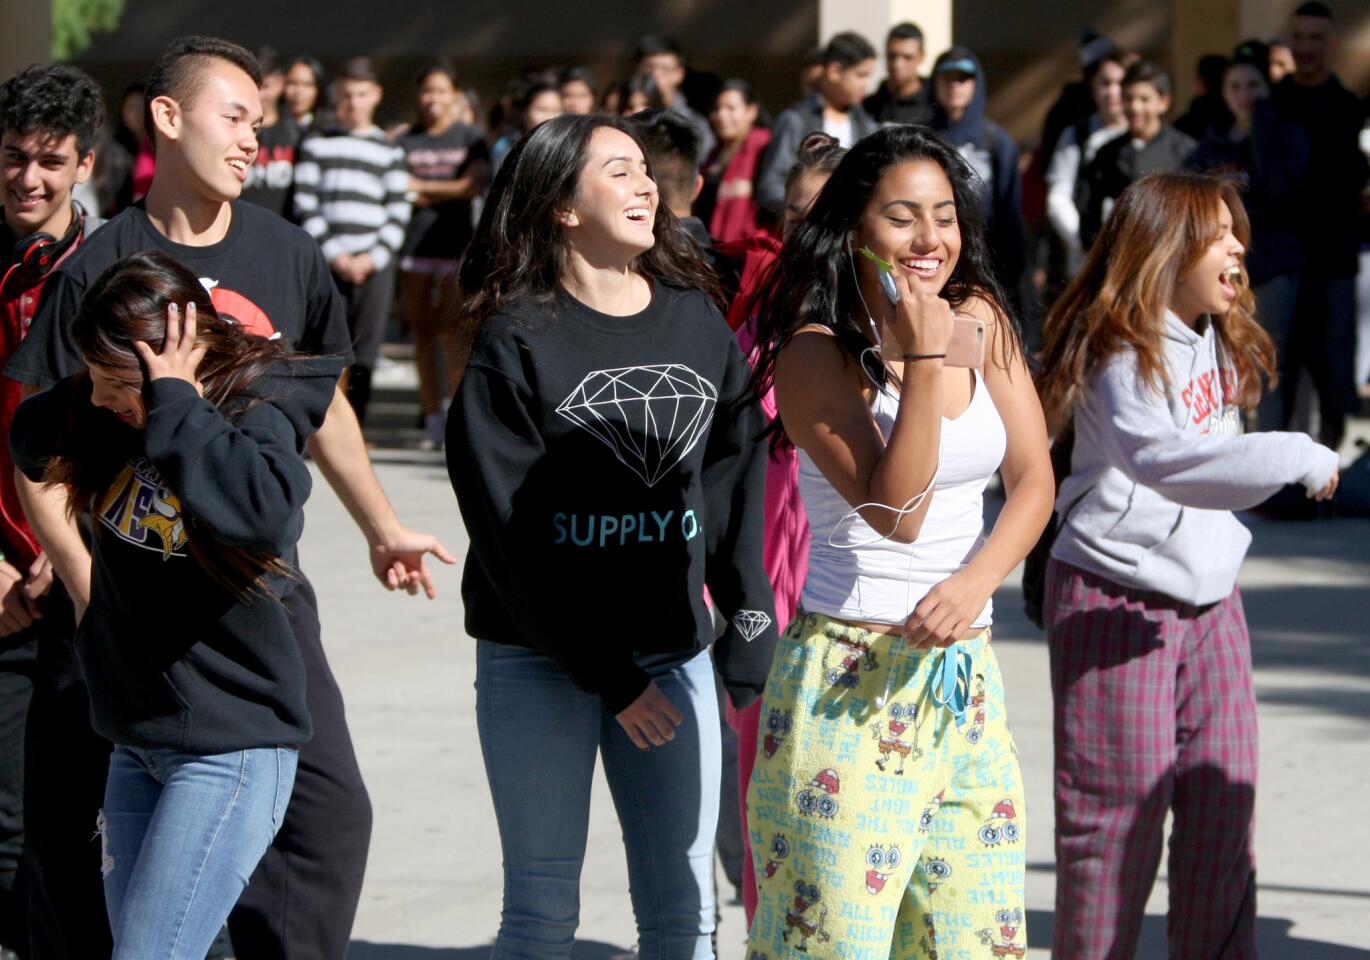 As part of Spirit Week, a group of students, including senior Ashley Vela, front right, danced during lunch wearing their pajamas for Pajama Day at Glendale High School in Glendale on Thursday, November 5, 2015.